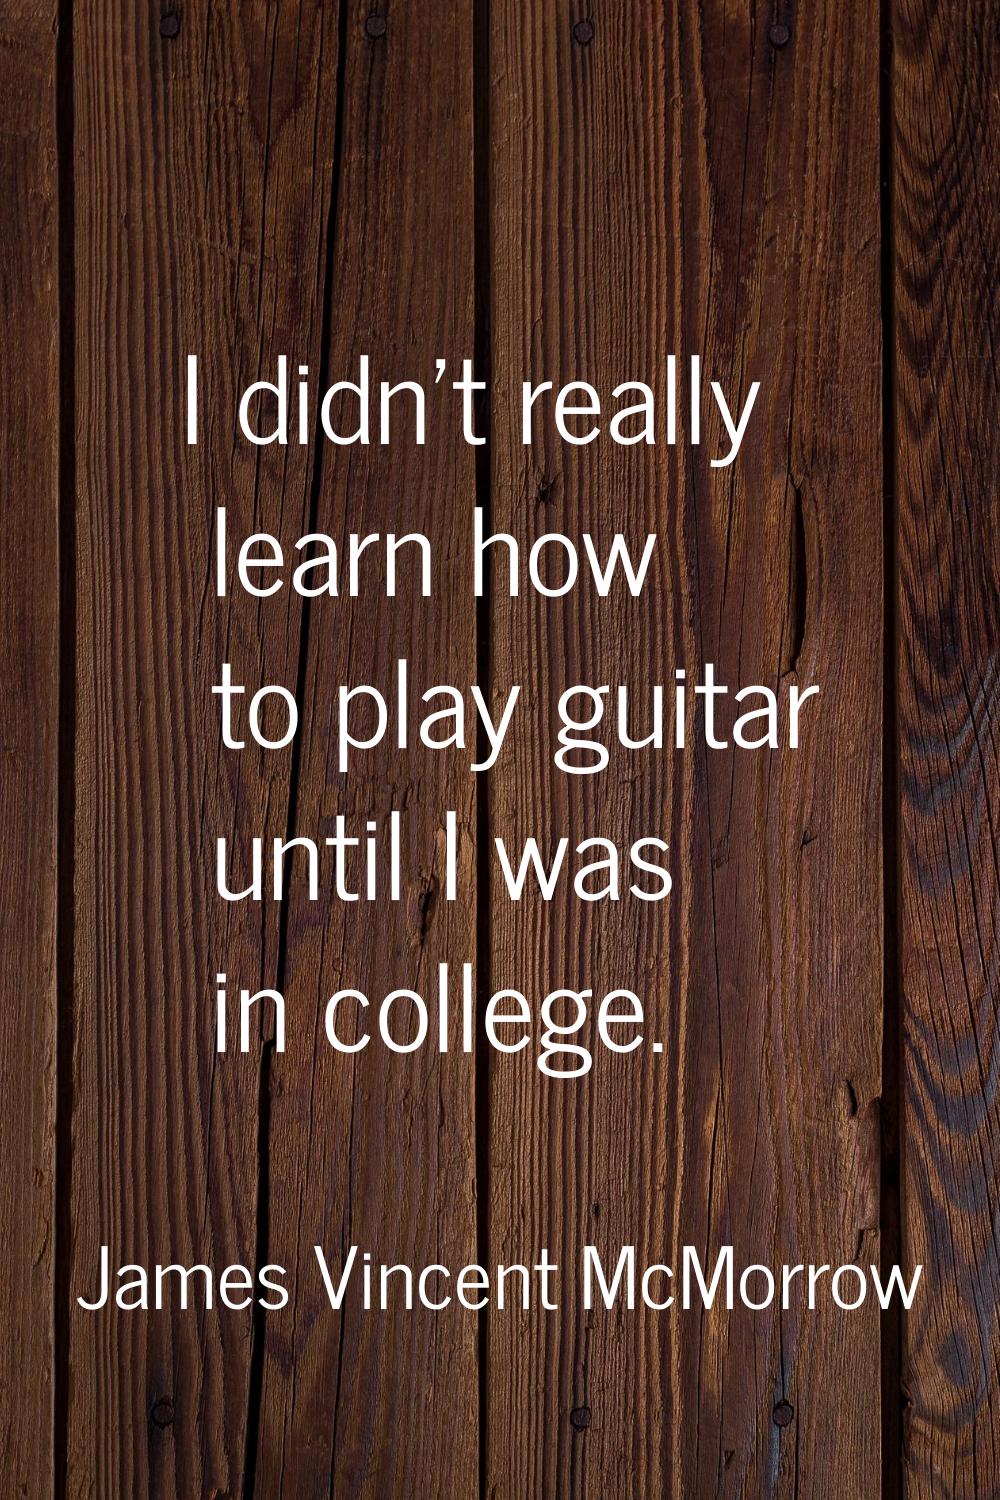 I didn't really learn how to play guitar until I was in college.